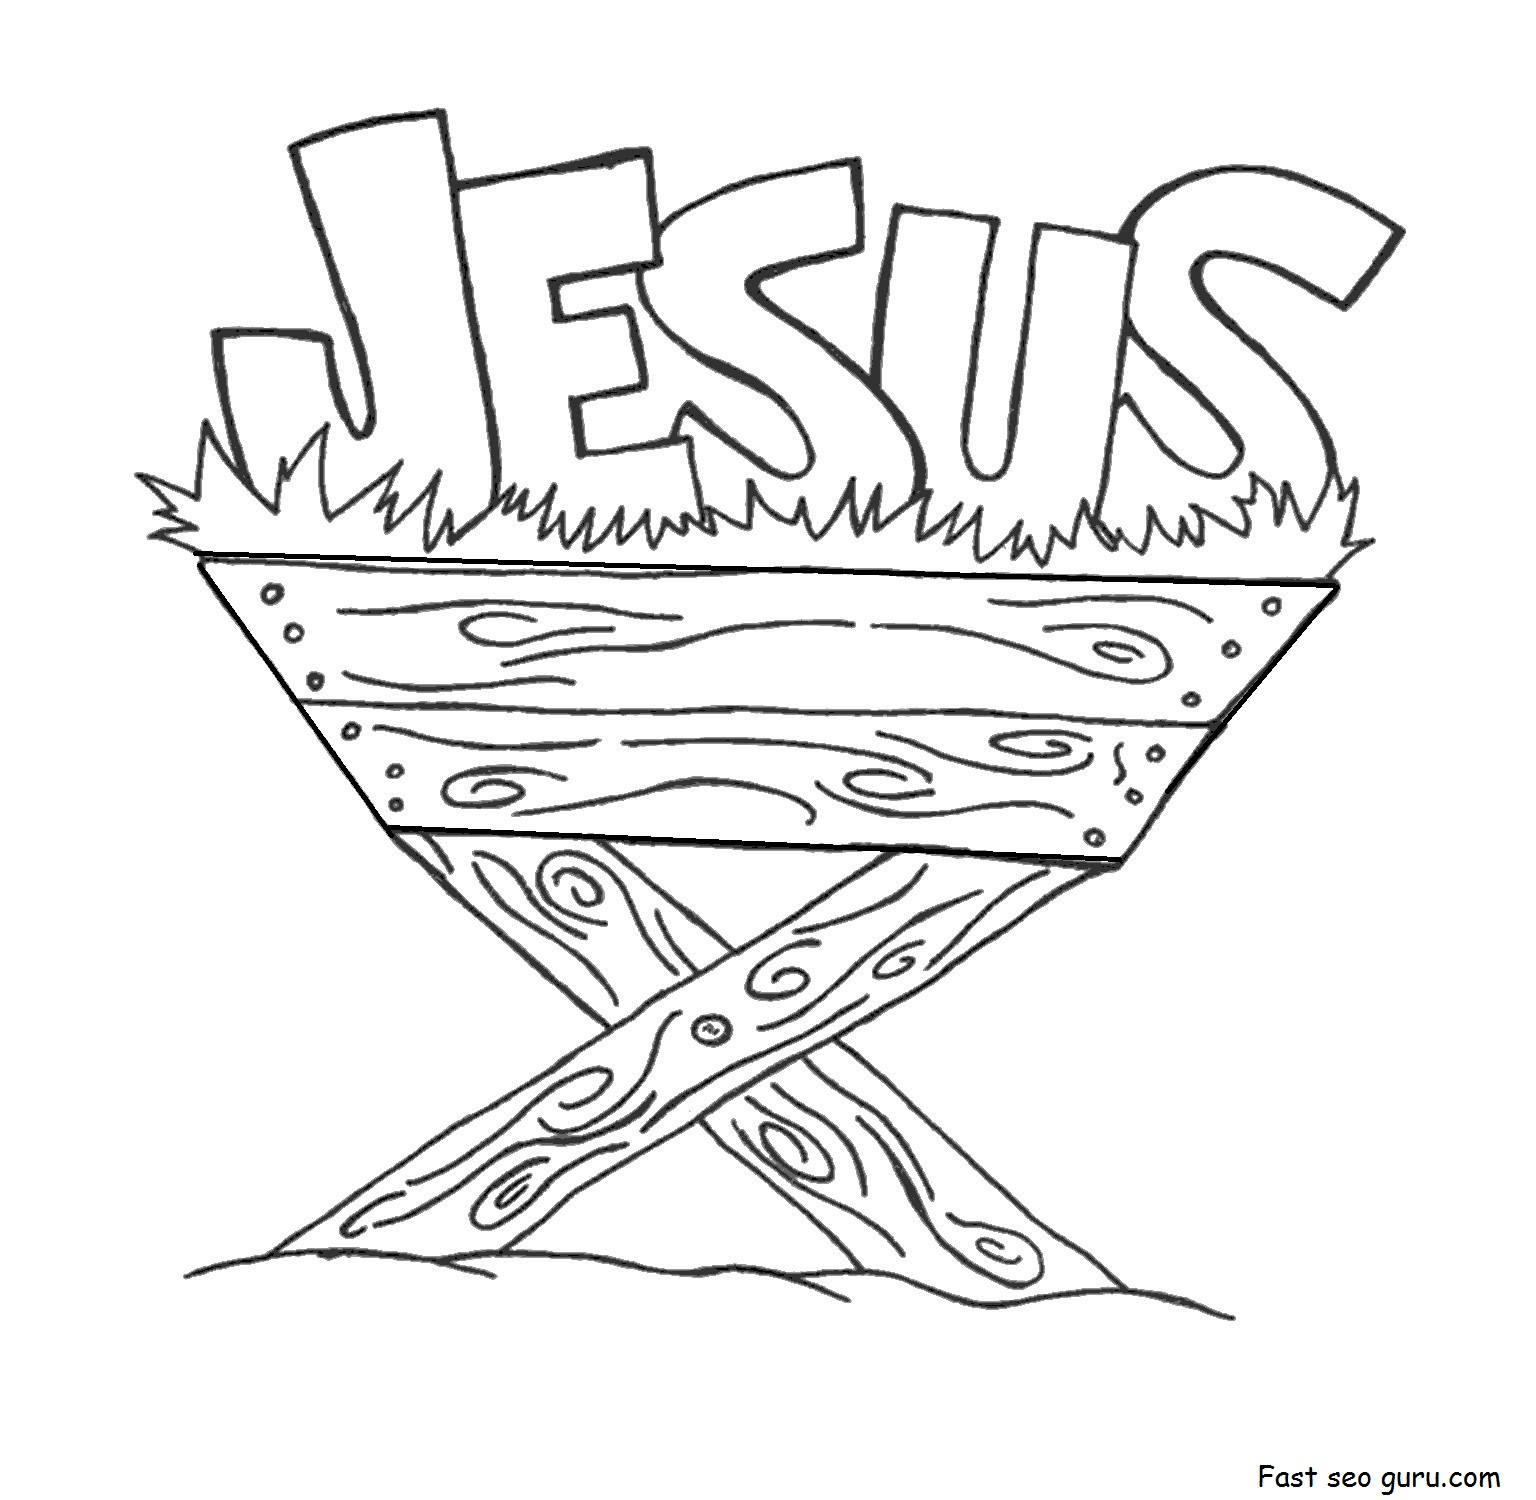 Print out jesus in the manger coloring pages - Printable Coloring Pages